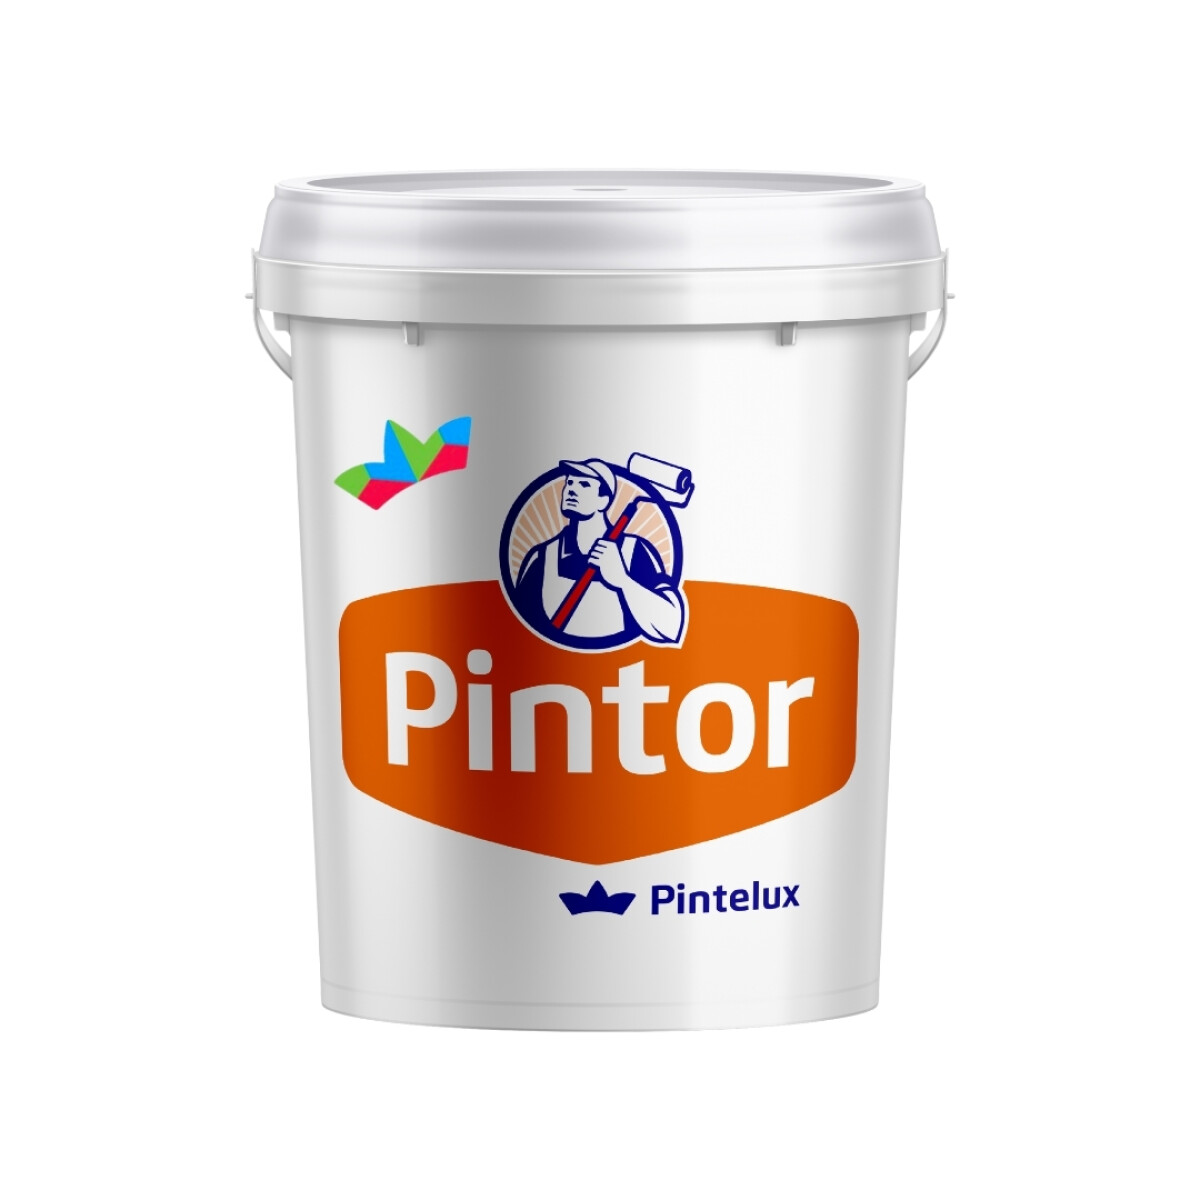 PINTOR MULTIPROPOSITO DAYMAN - 3.6LTS 